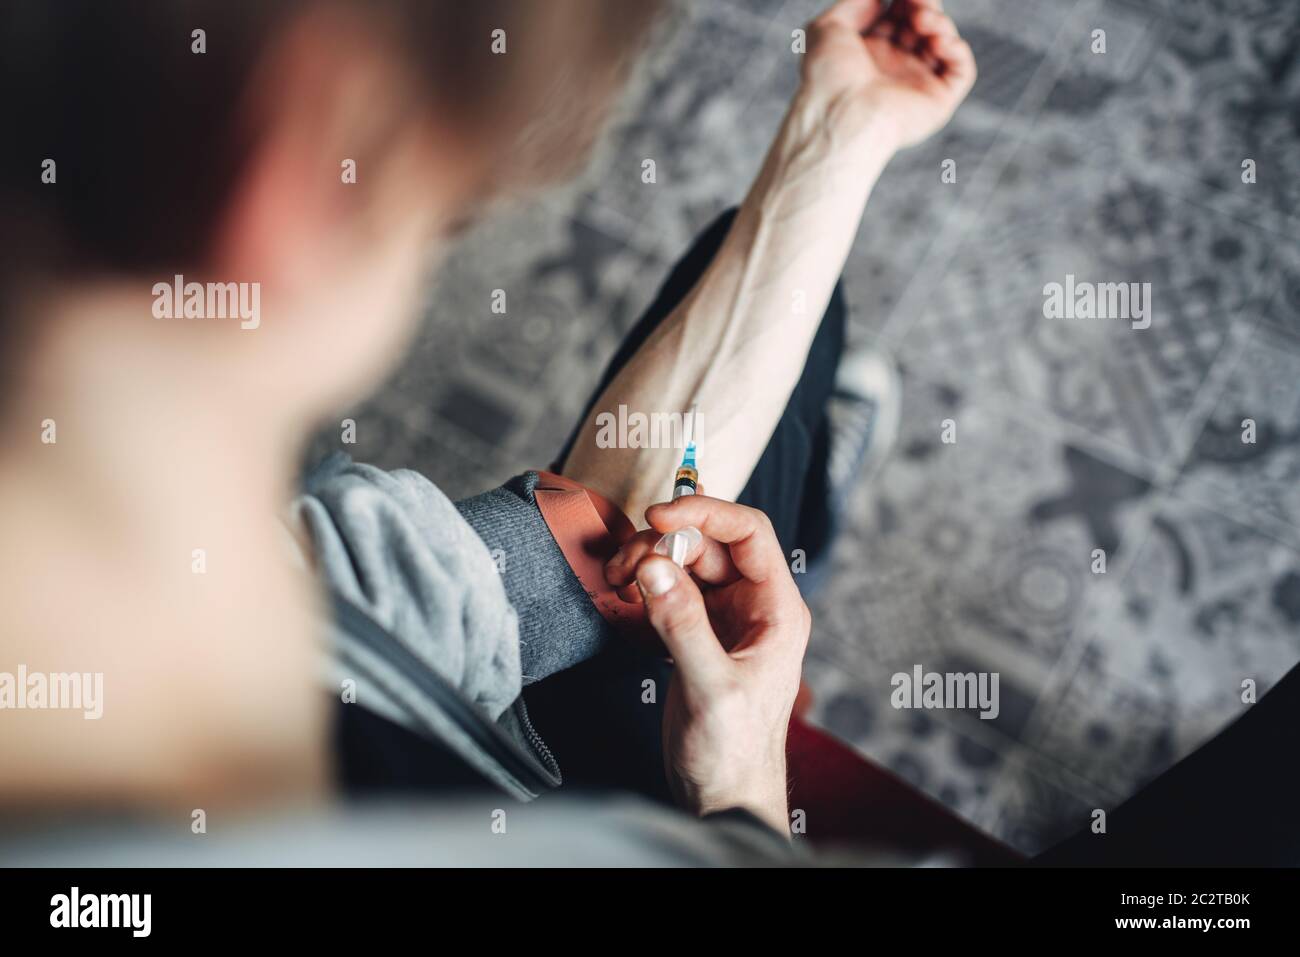 Male junky with a syringe doing an injection dose in the arm. Narcotic addiction concept, drug addicted people Stock Photo